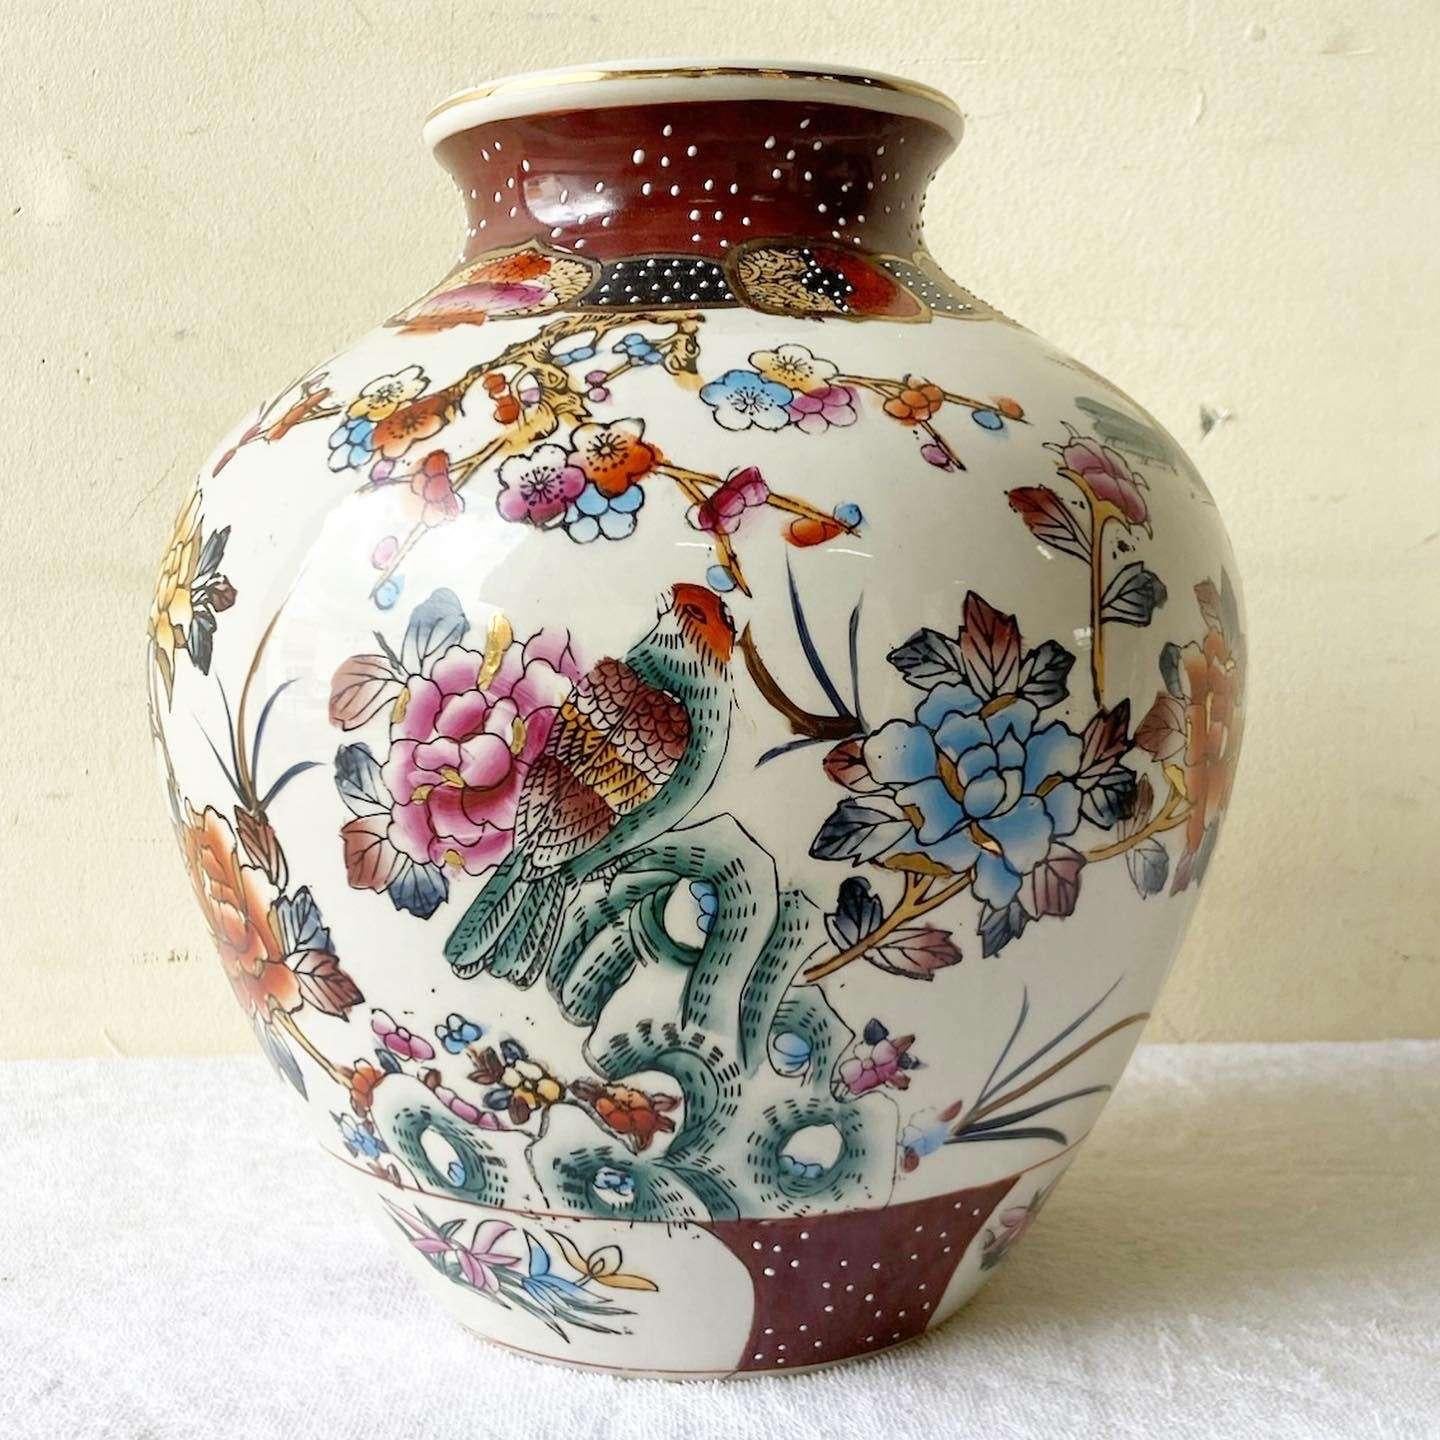 Amazing vintage Chinese hand painted vase. Features flared flowers with foliage through the exterior of the vase.
